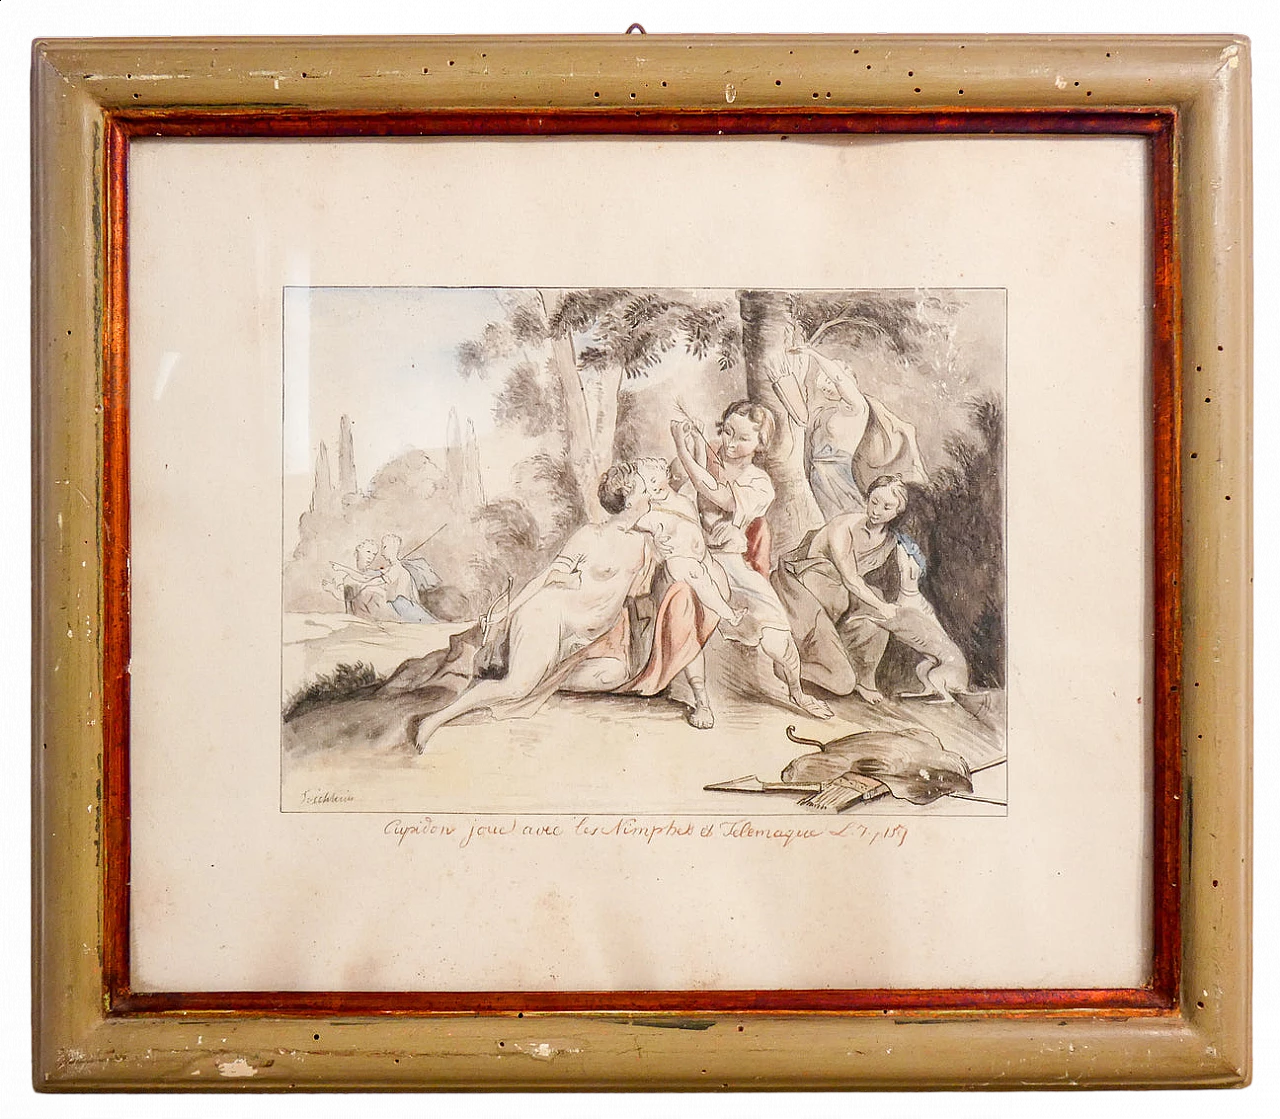 Cupid playing with the Nimphes and Telemachus, watercolour and pencil on paper, 19th century 7